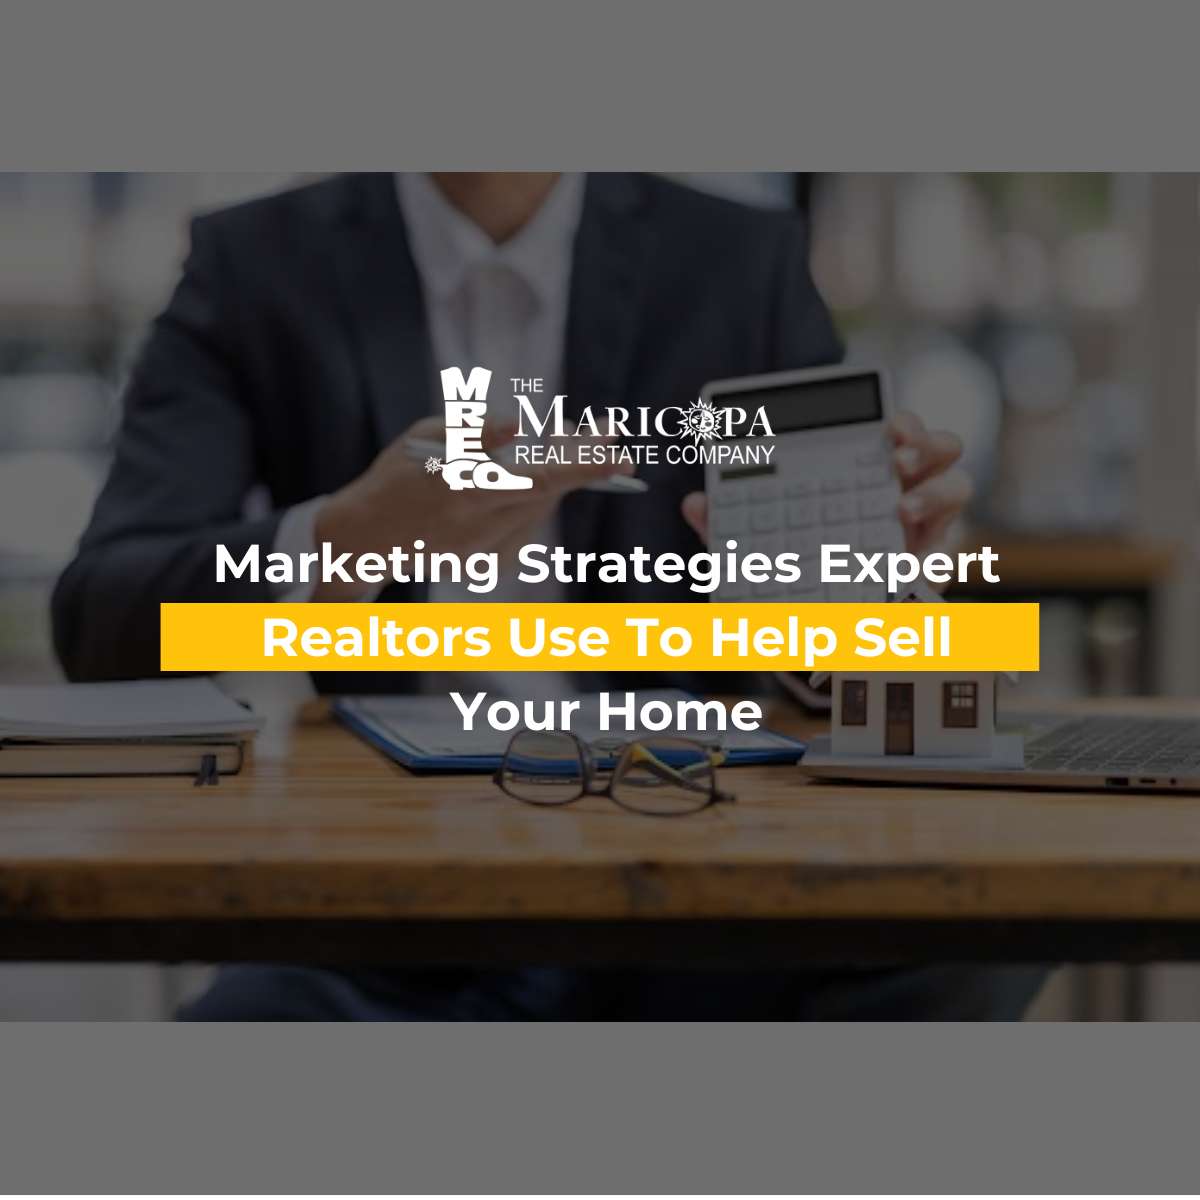 Marketing Strategies Expert Realtors Use To Help Sell Your Home